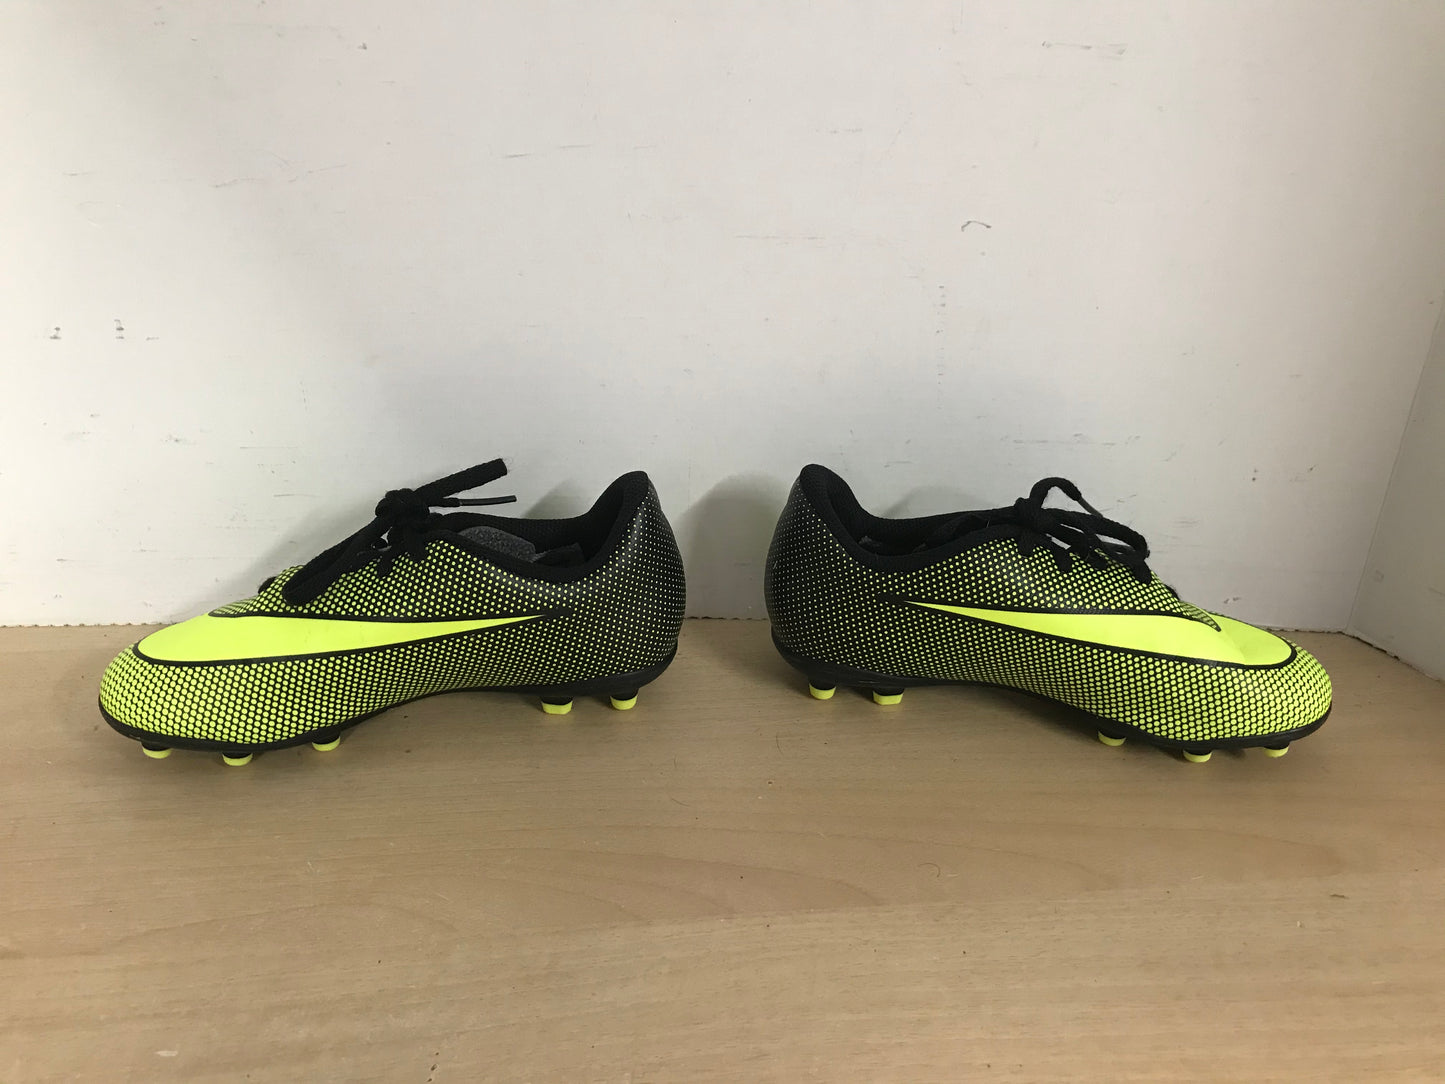 Soccer Shoes Cleats Child Size 13 Nike Black Lime Excellent